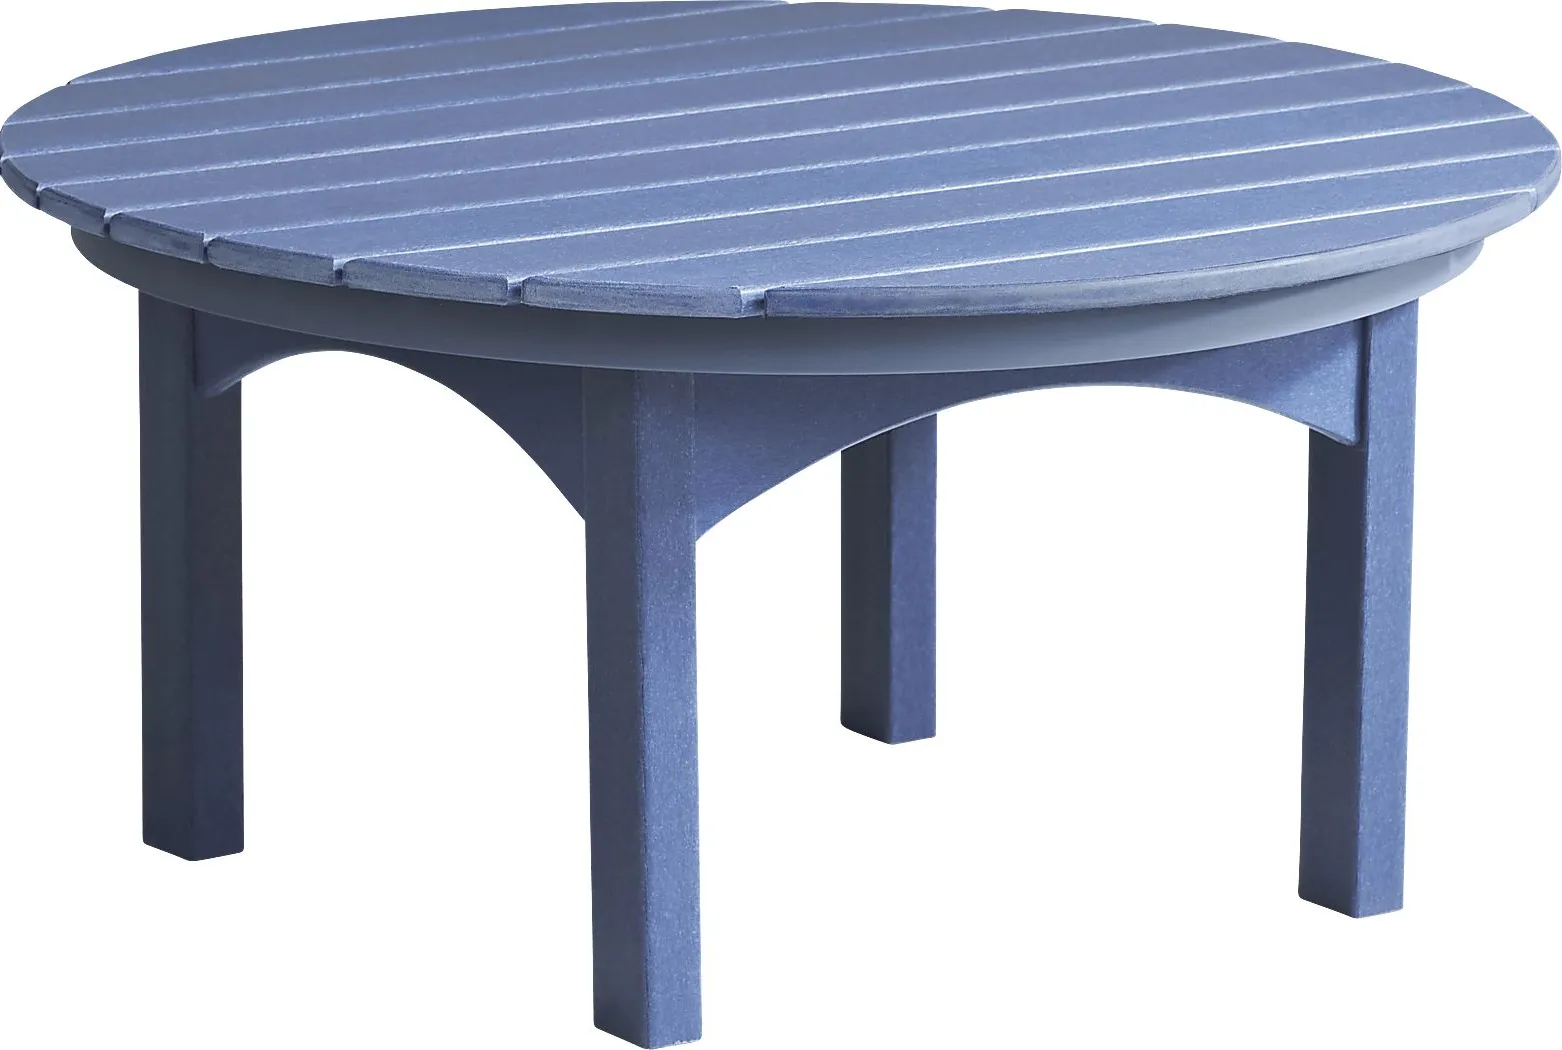 Addy Navy Round Outdoor Cocktail Table